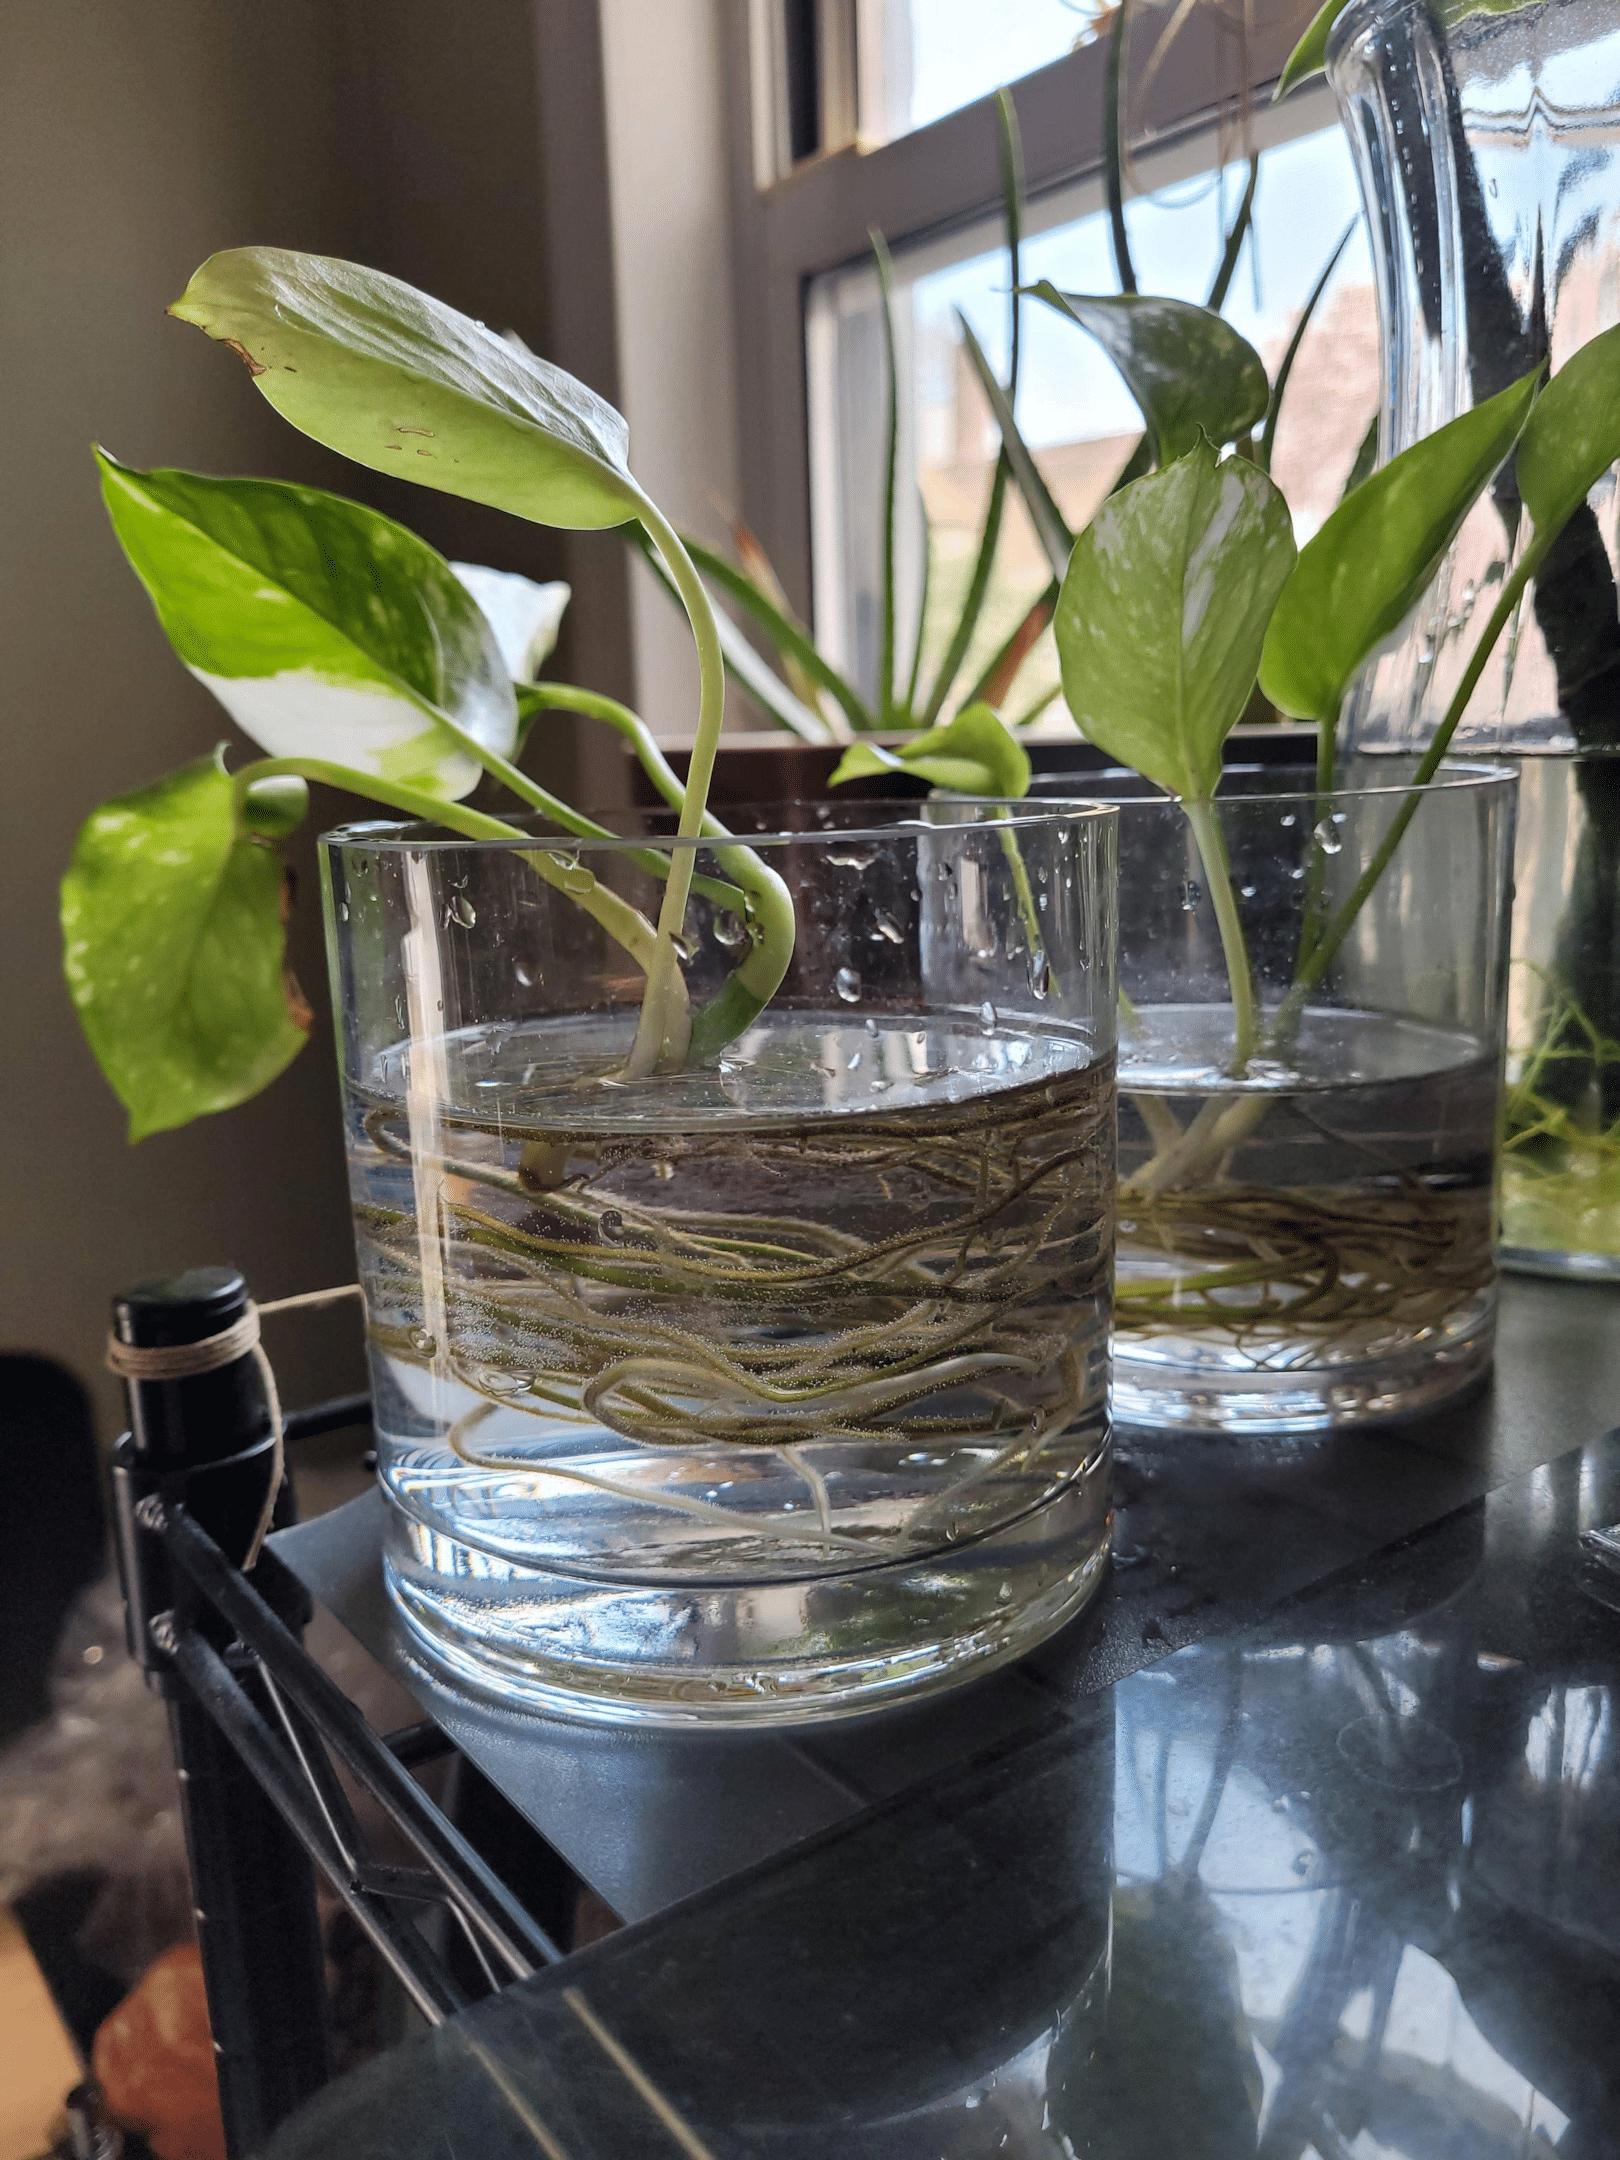 Golden Pothos plant with several cuttings in a pot filled with room temperature water